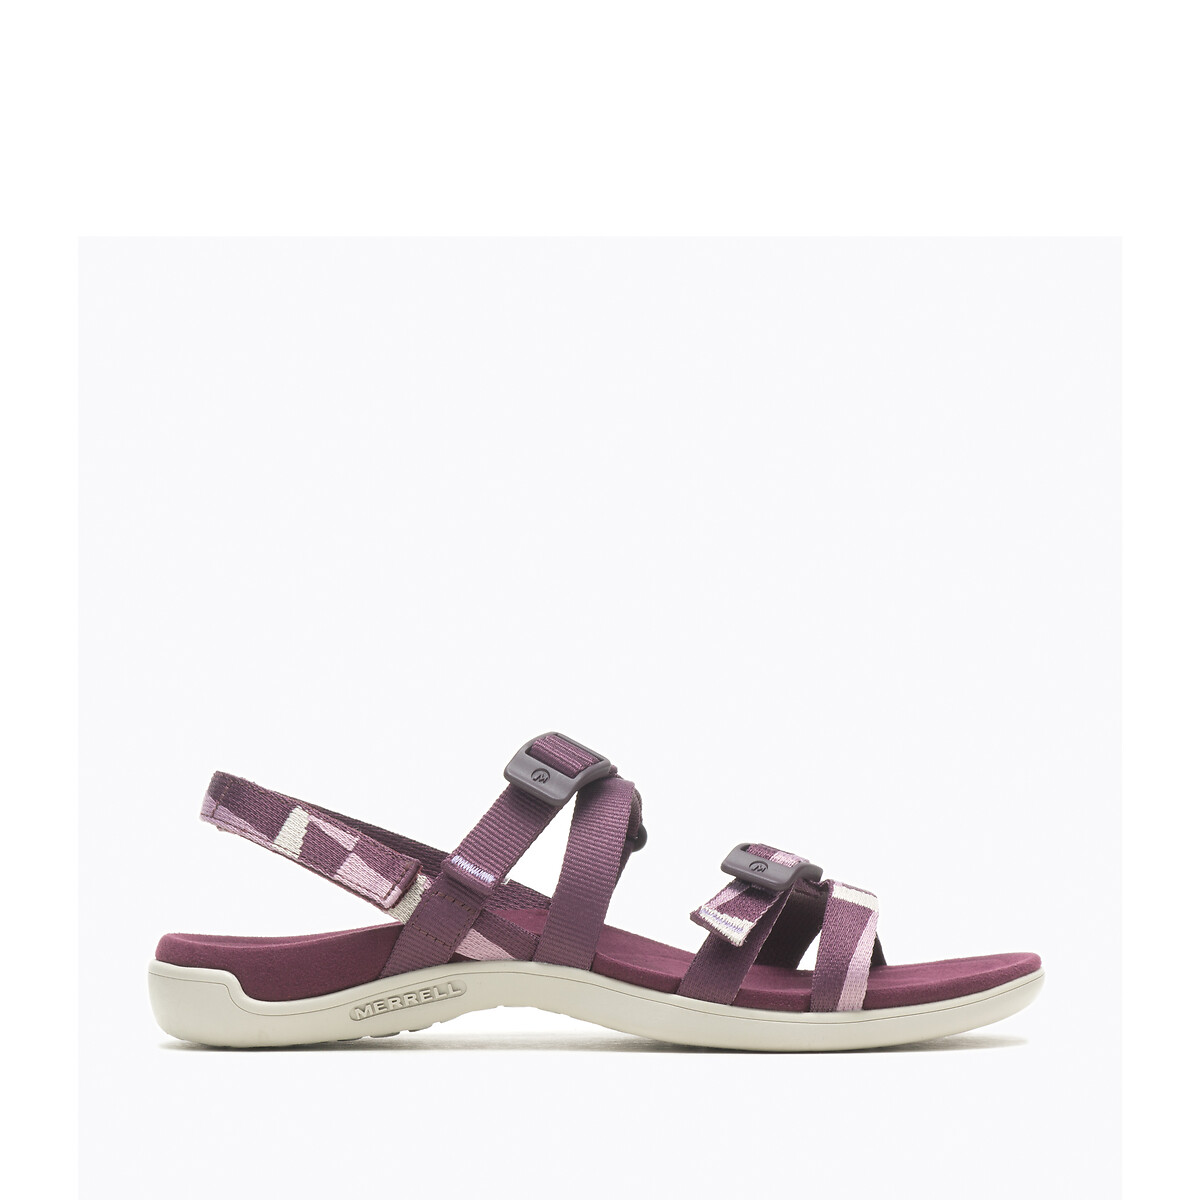 Image of District 3 Backstrap Web Sandals in Canvas